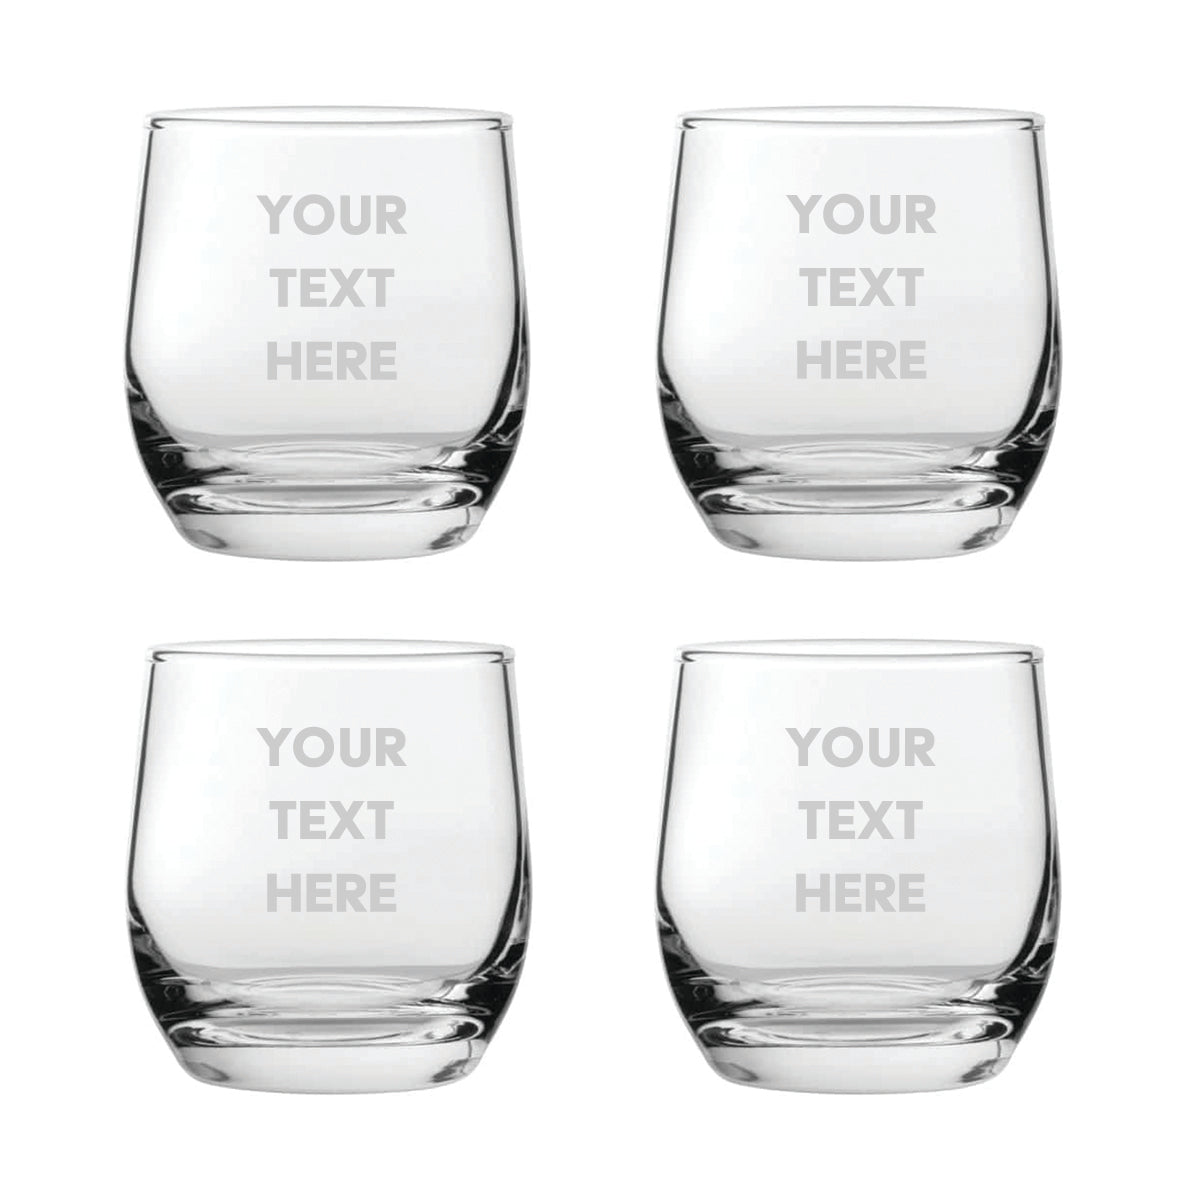 Engraved Glass Tumblers With a Your Own Message